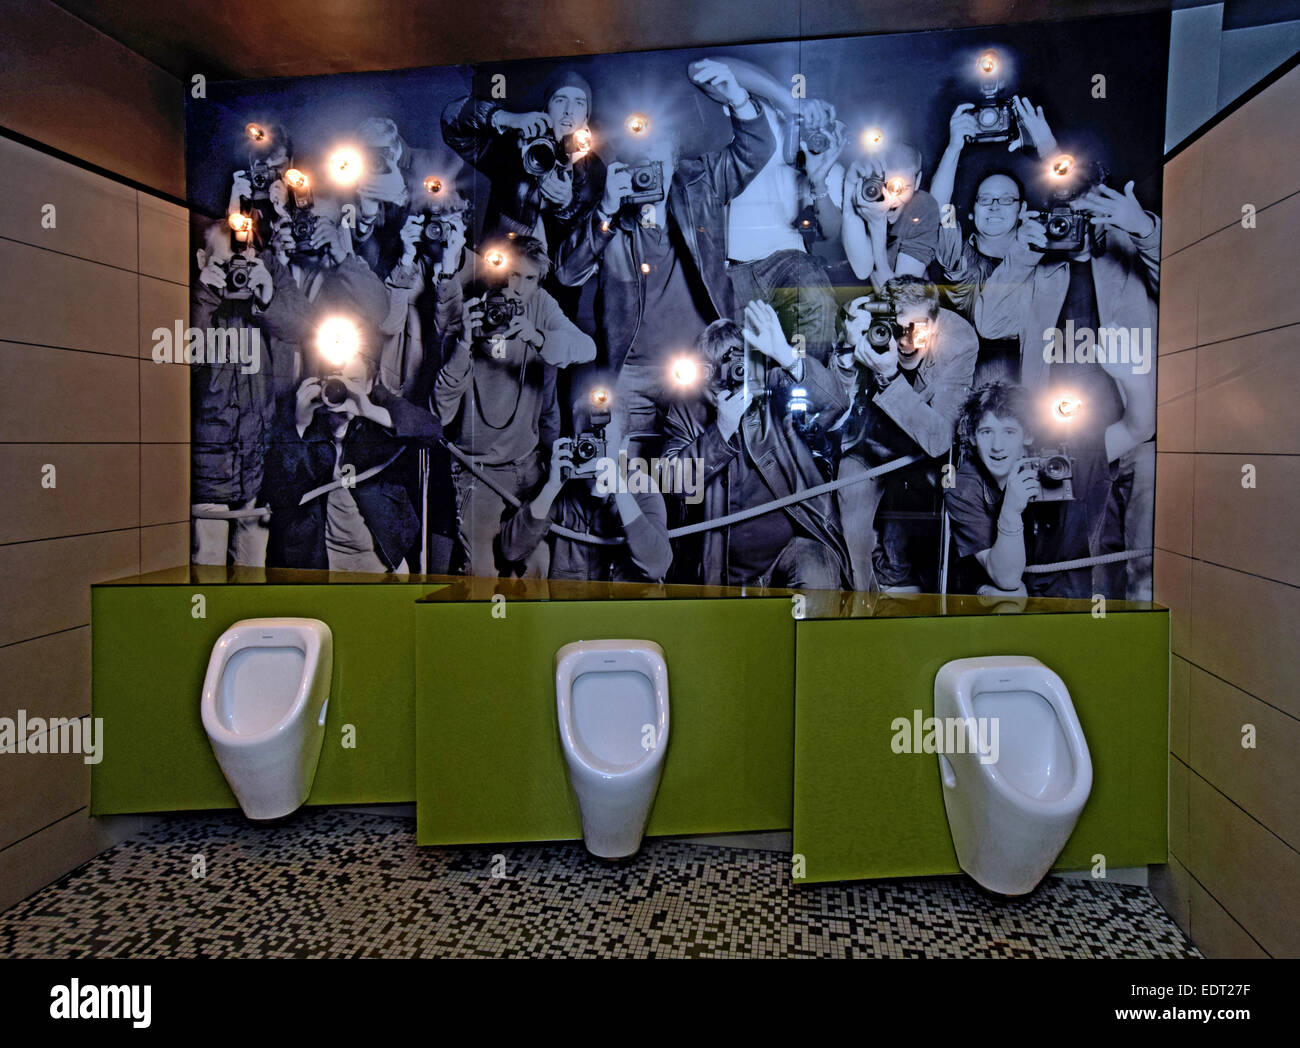 An ornate men's bathroom in an upscale restaurant in Long Island with a photo mural of paparazzi and flashing light bulbs. Stock Photo